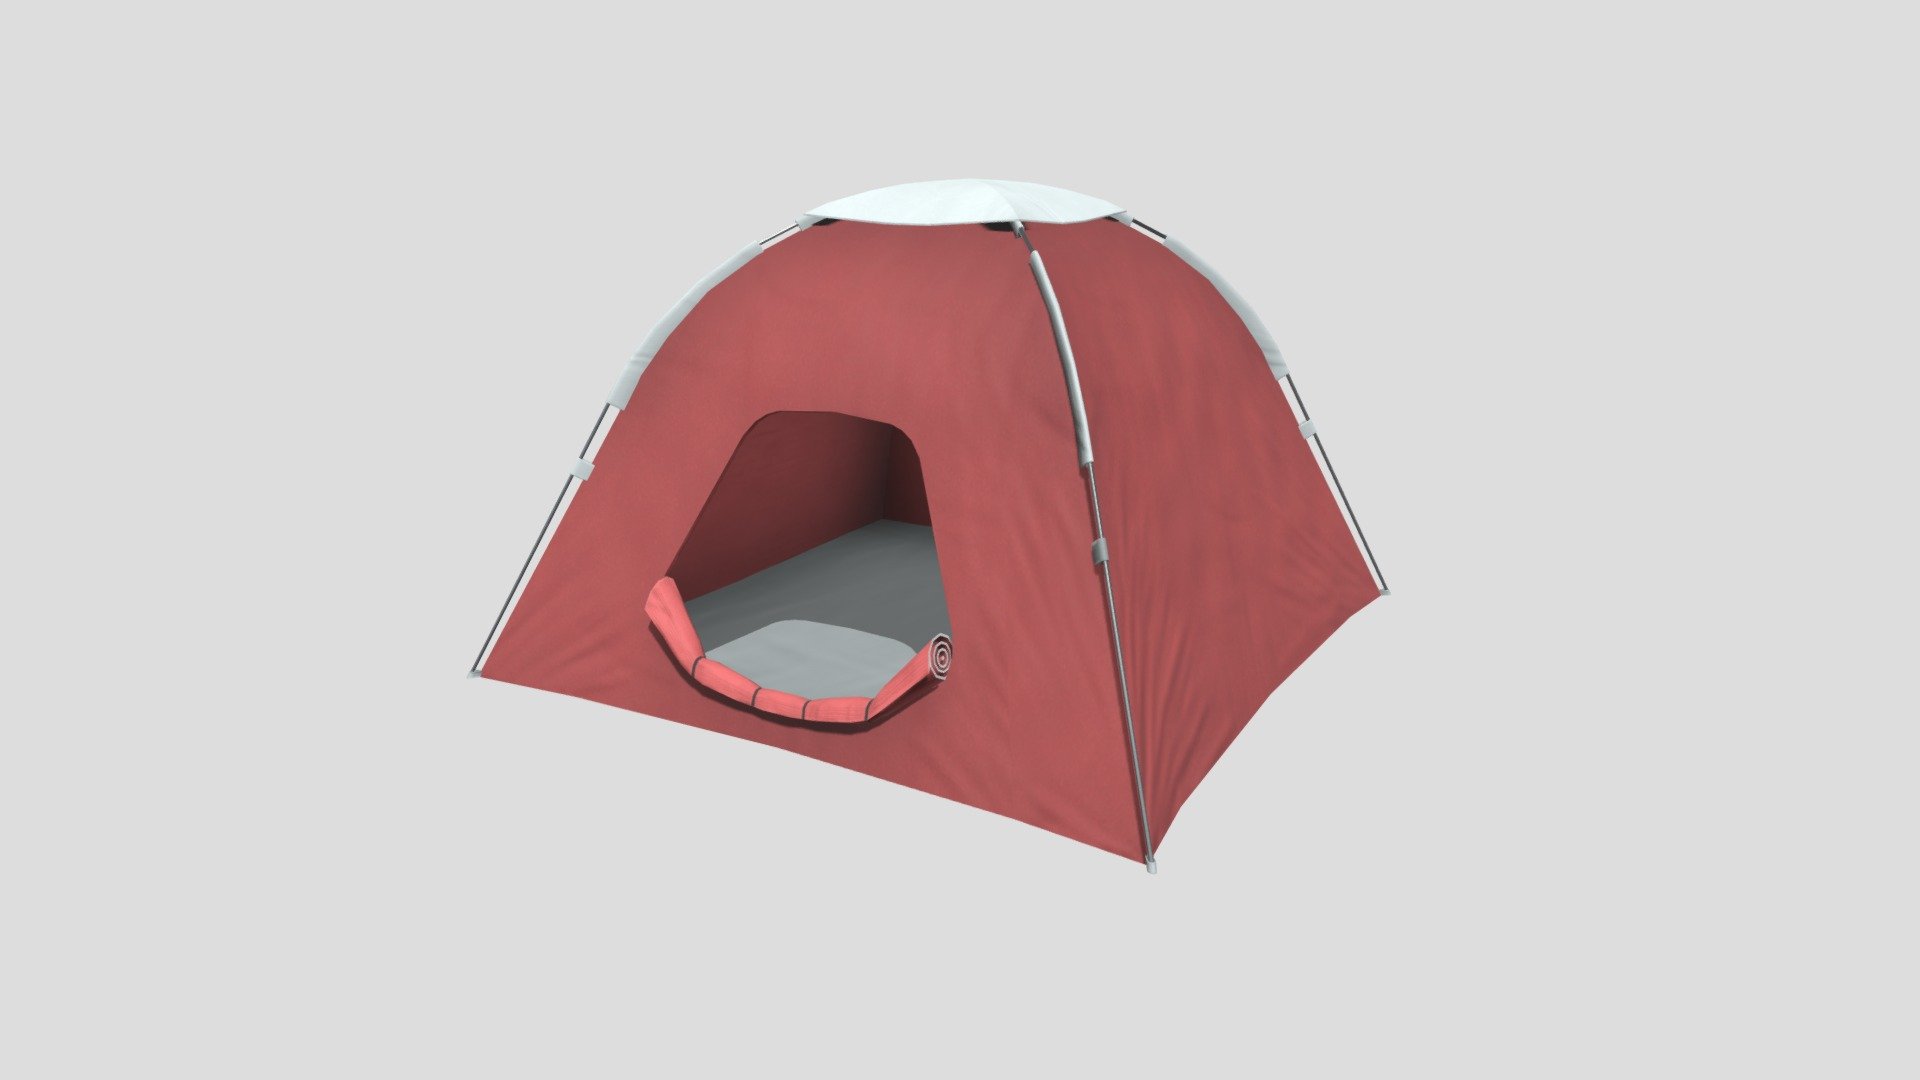 Low poly of a modern tent, made with Autodesk Maya and textured with Substance Painter - Modern Tent - 3D model by Olívia Teixeira (@oliviateixeiracs) 3d model